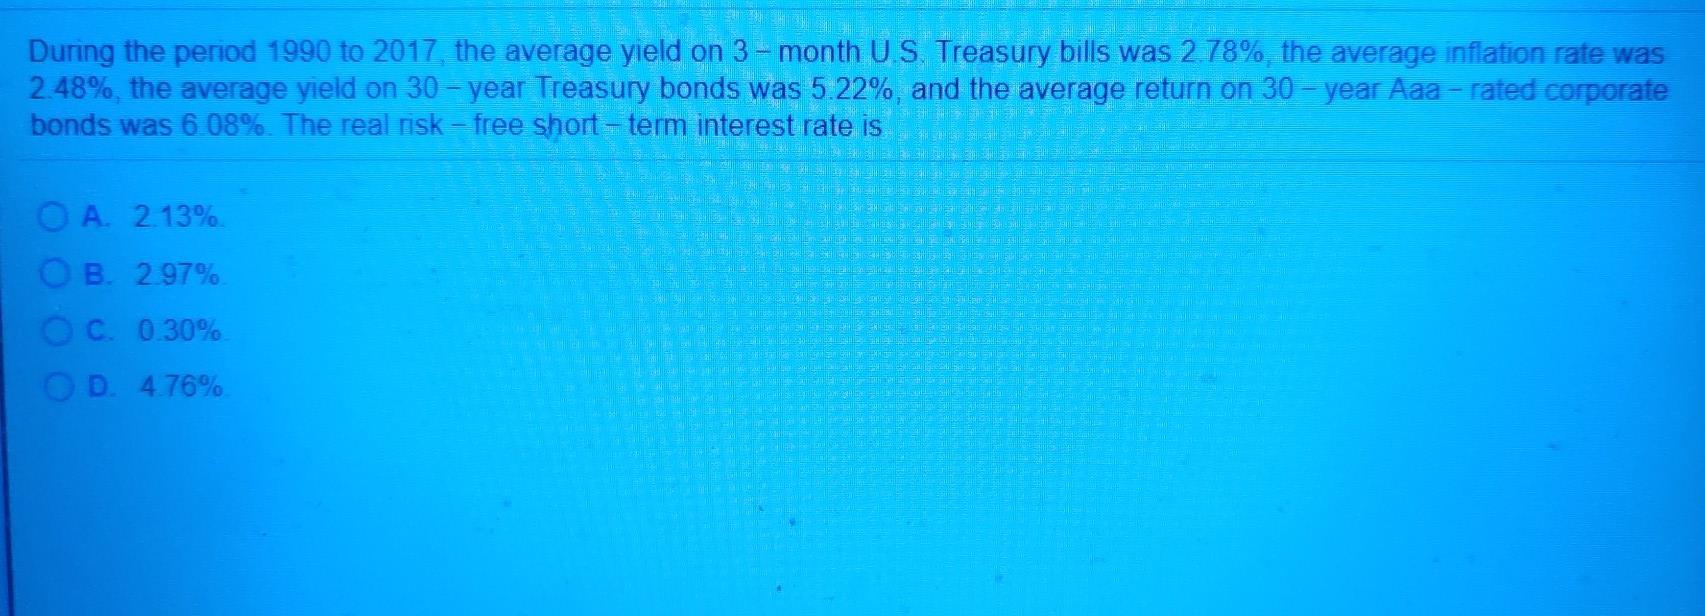 During the period 1990 to 2017, the average yield on 3-month U.S. Treasury bills was 2.78%, the average